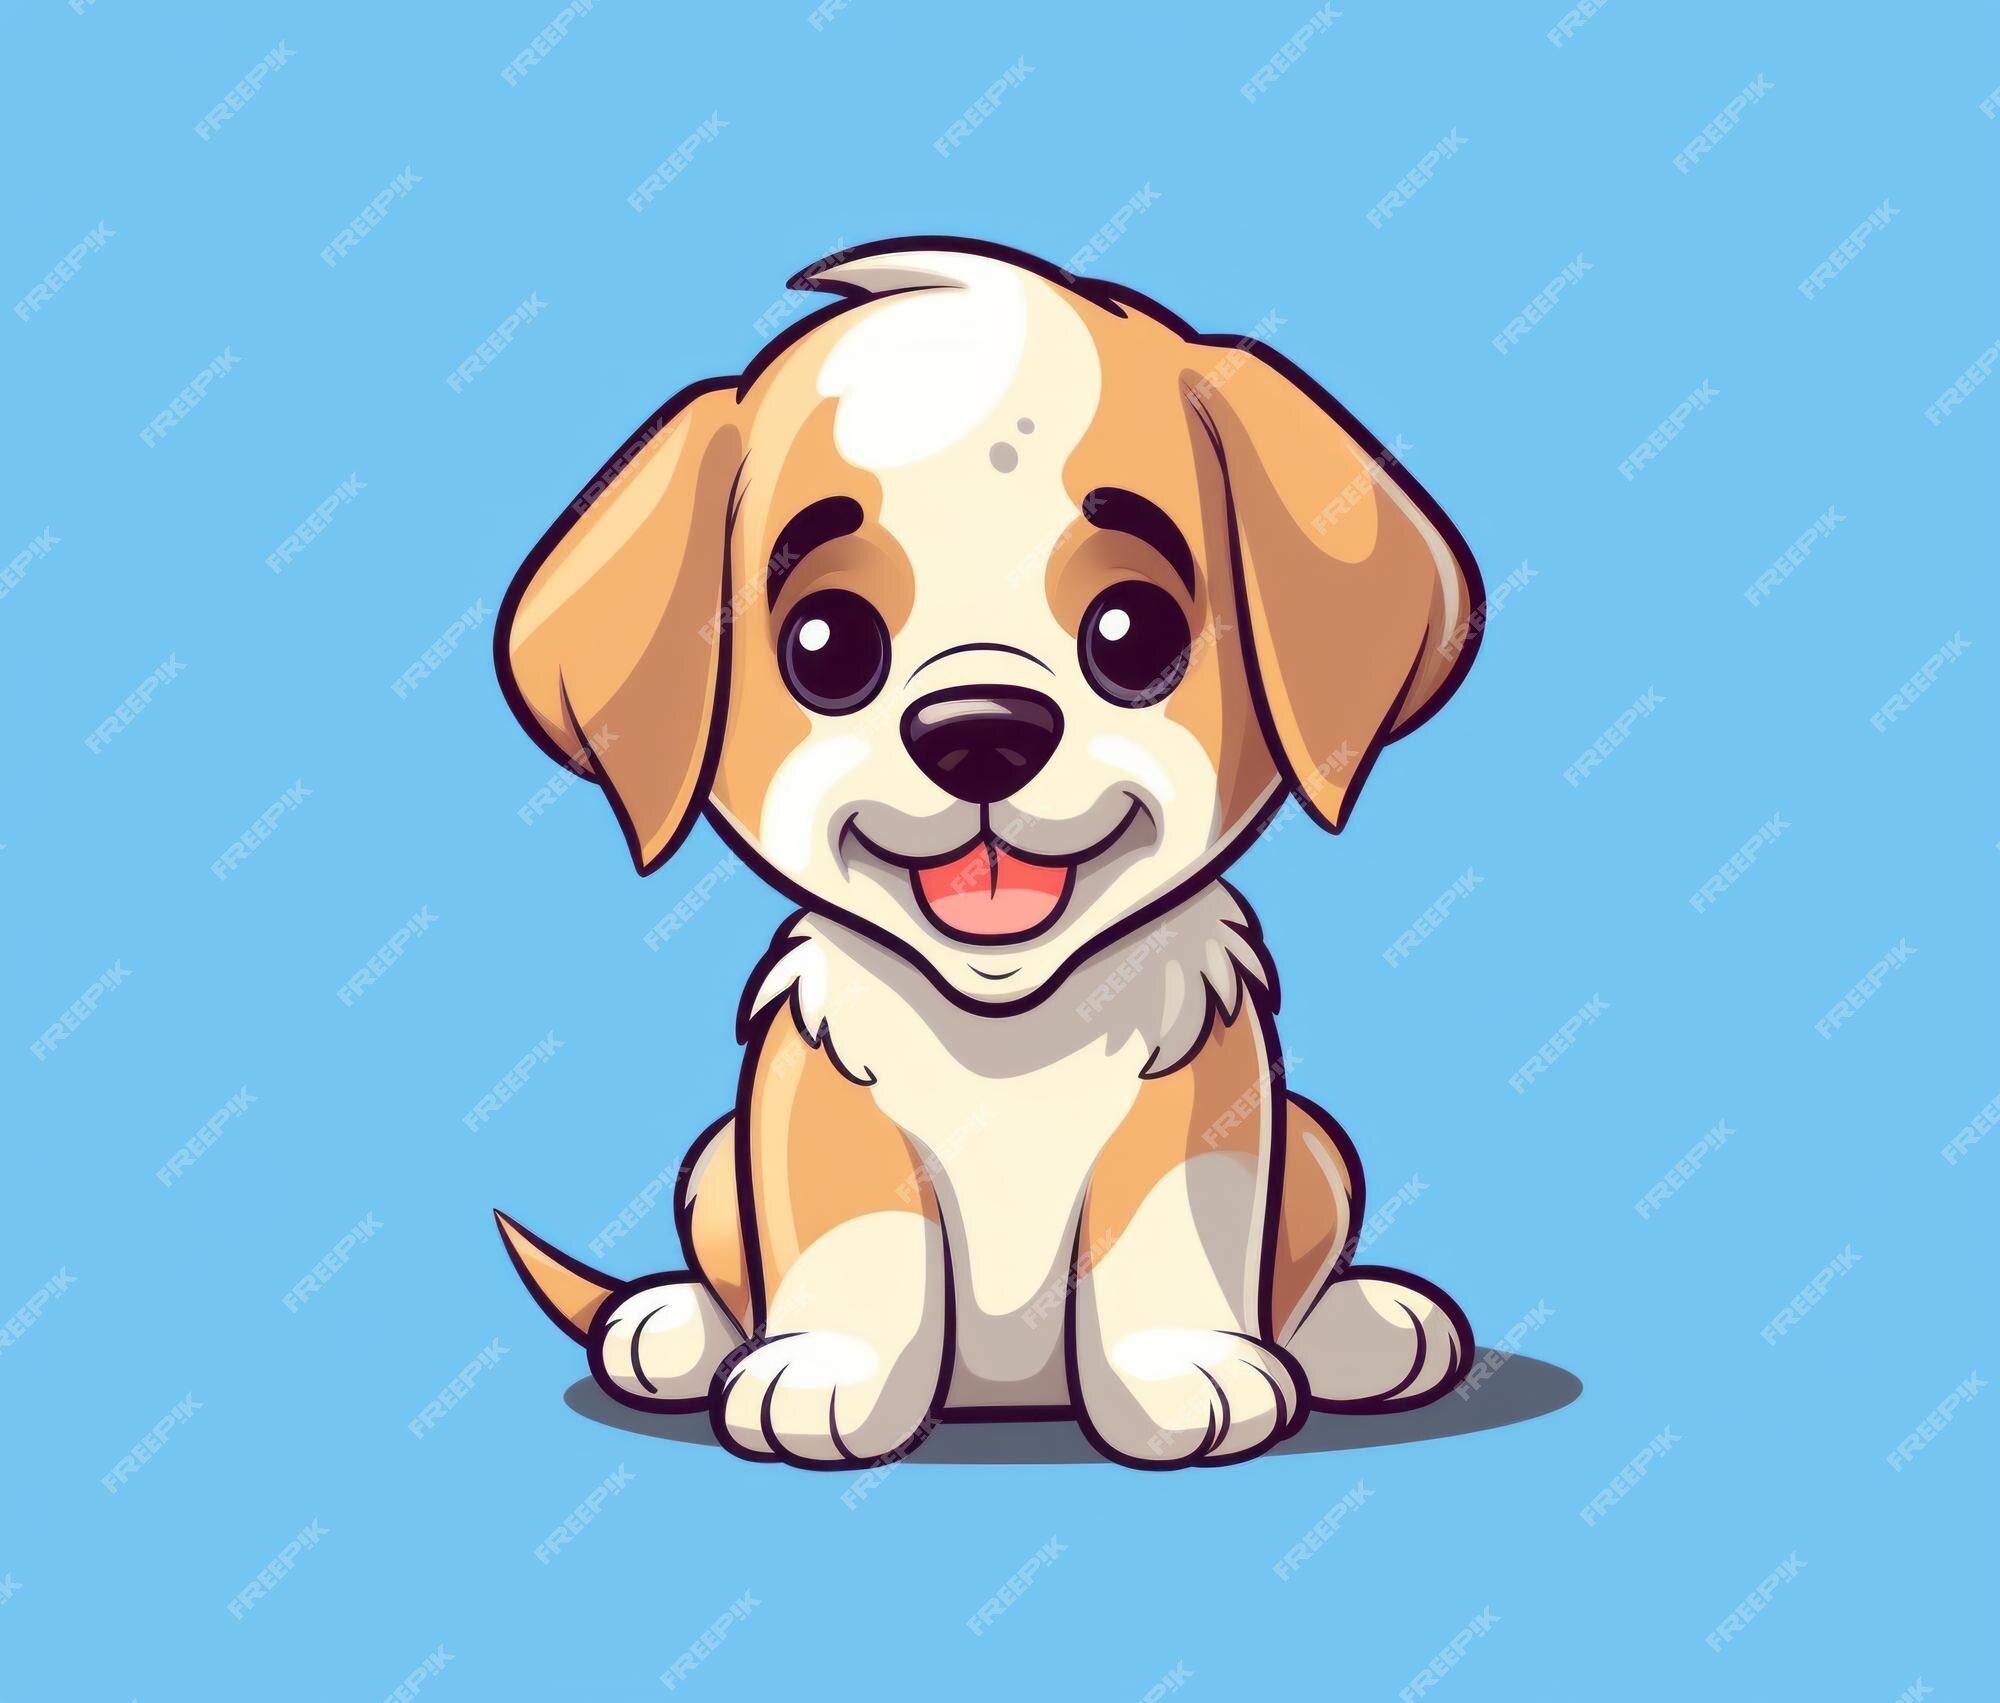 Premium AI Image | Illustration of a cute puppy with a blue background.